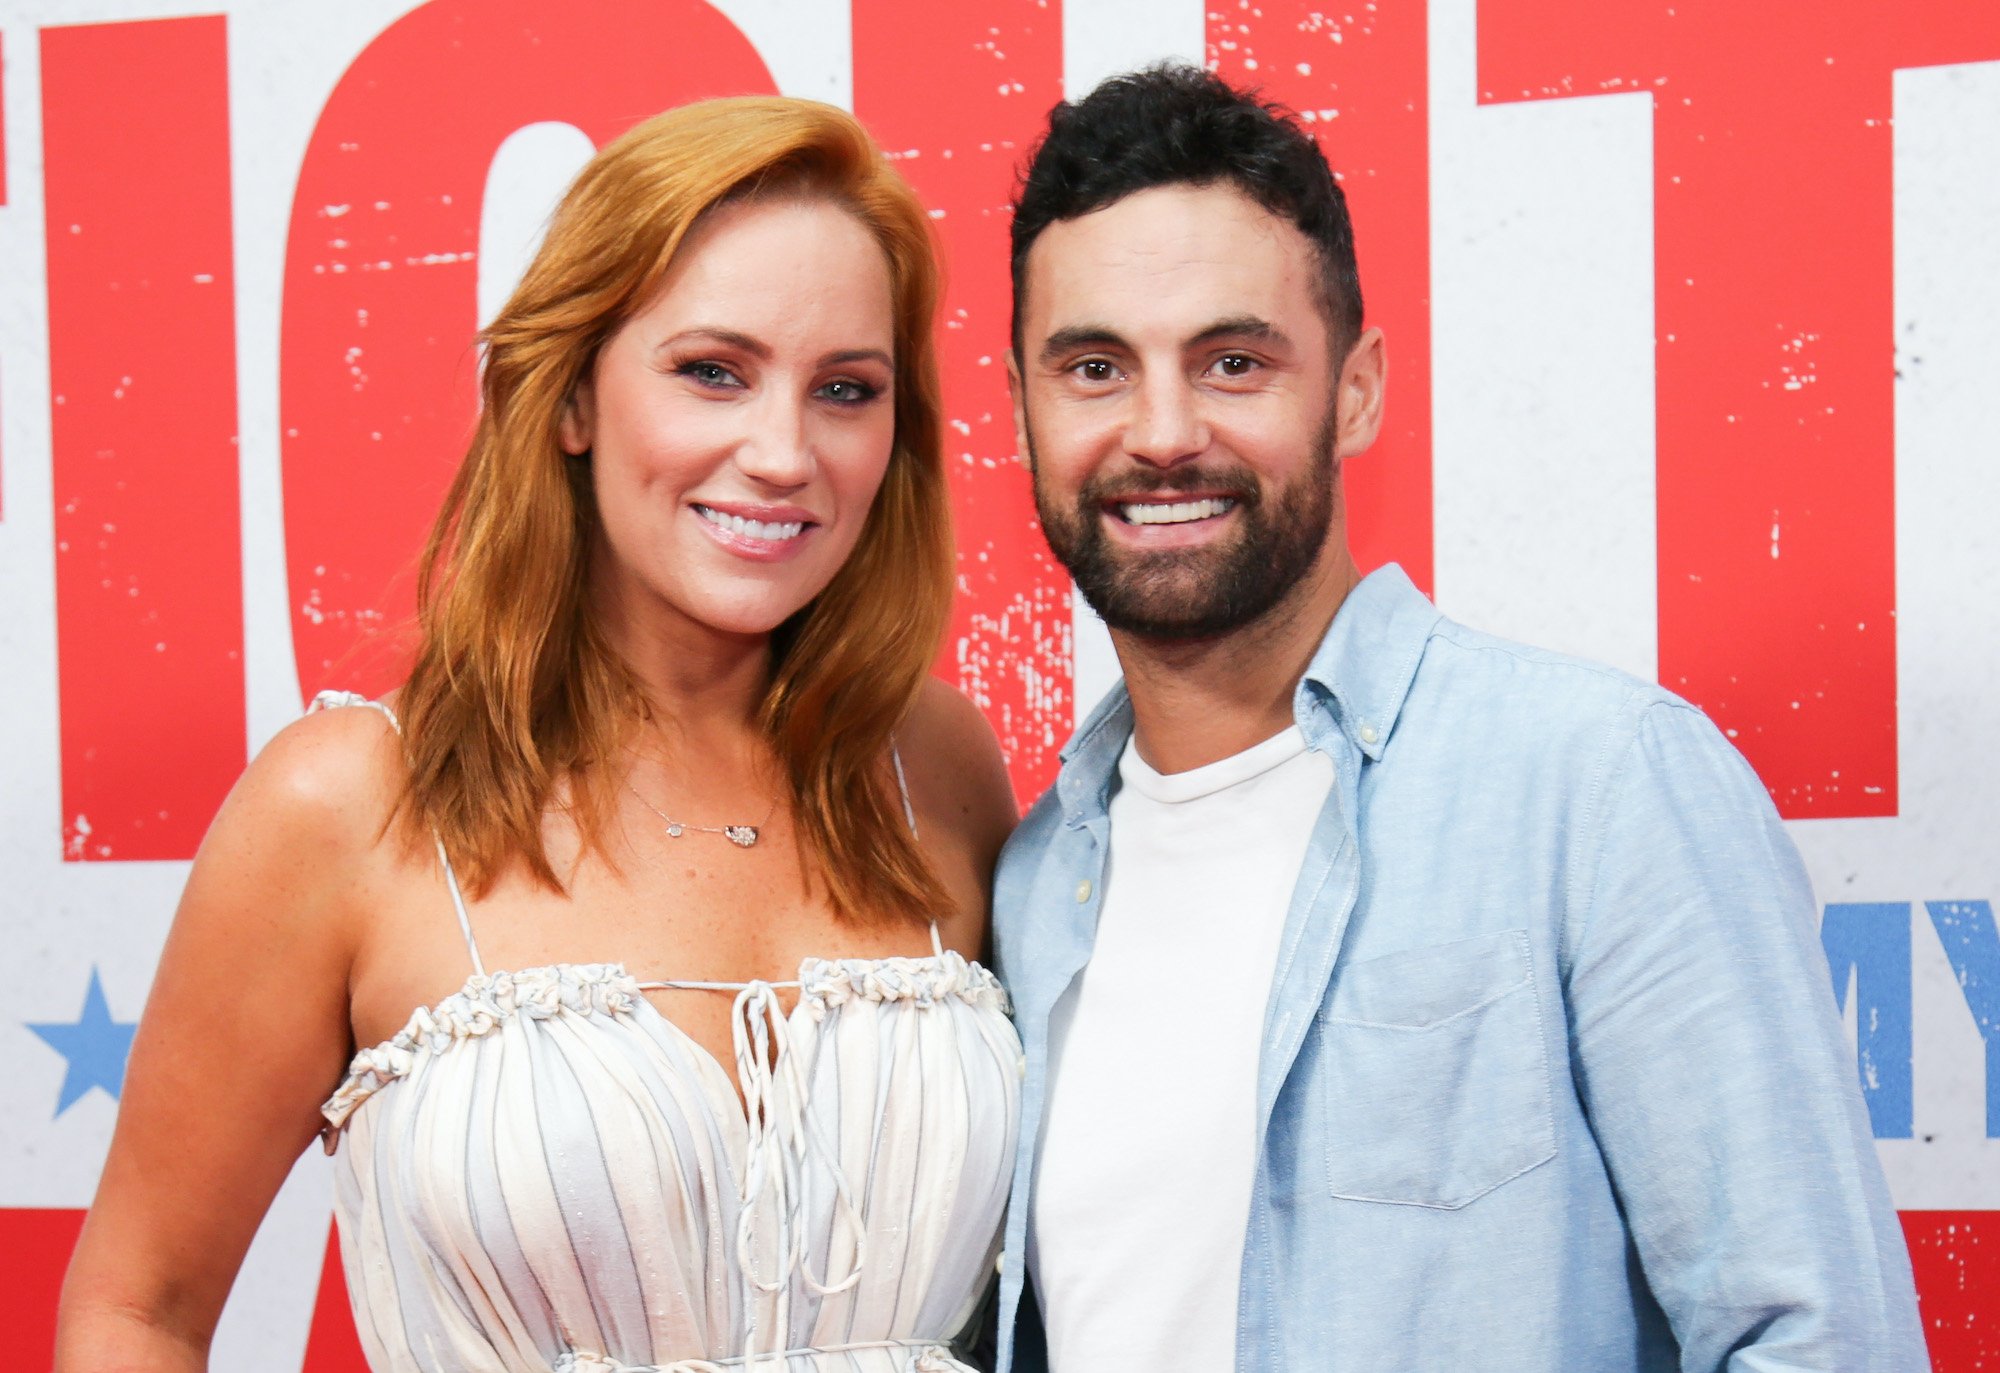 Jules Robinson and Cameron Merchant smiling in front of a red and white background